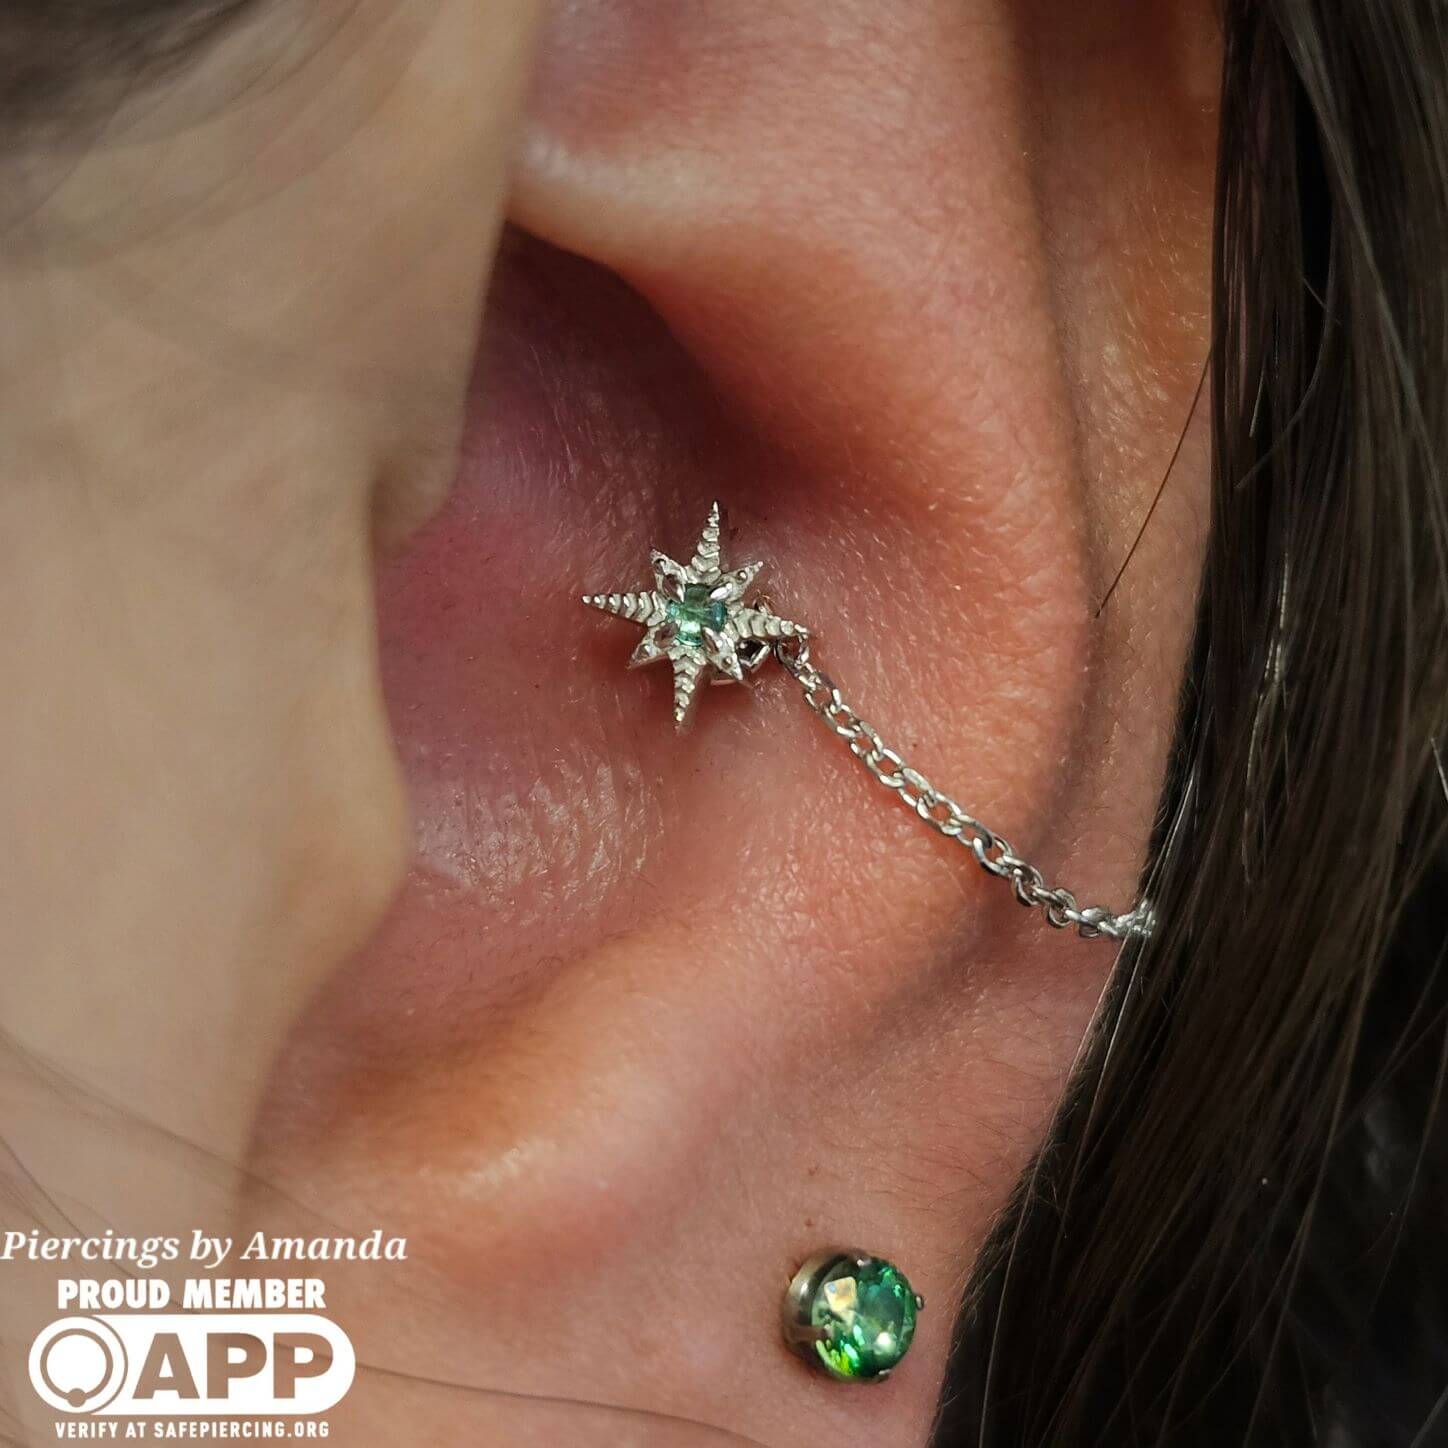 Amanda installed this 14k white gold star with an emerald in a healed conch and adorned it with a 14k white gold chain custom made in house